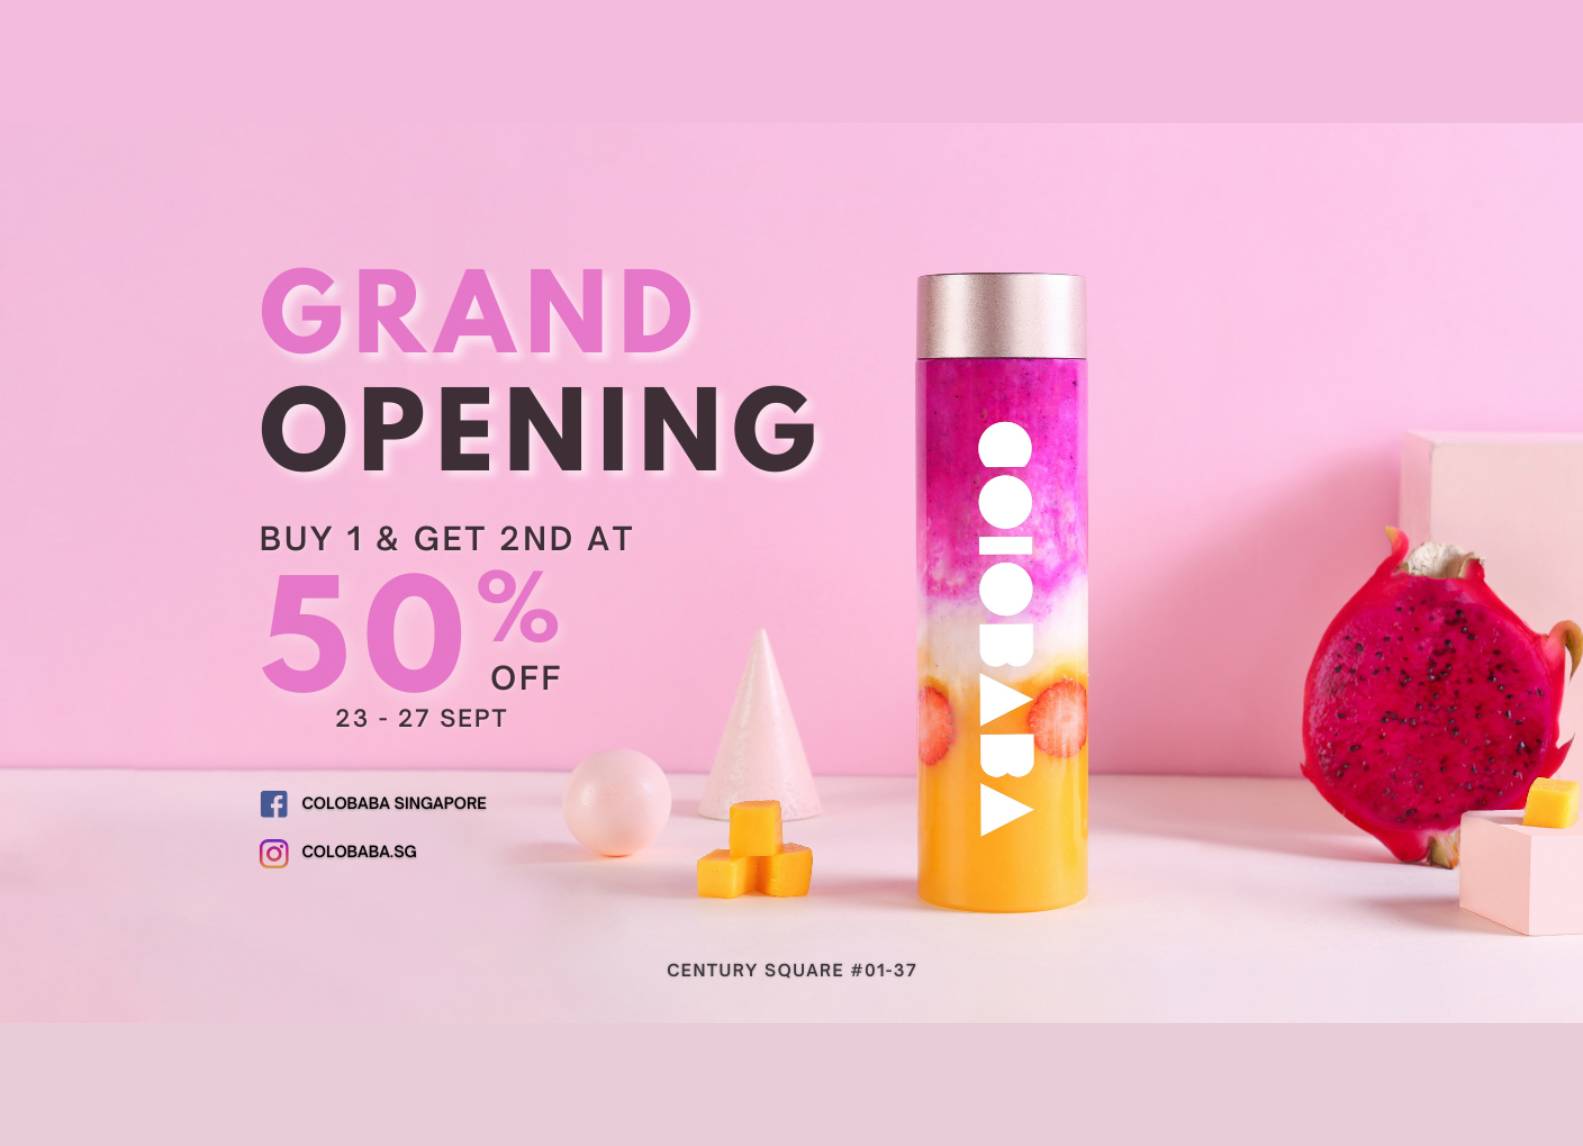 Colobaba Grand Opening Buy 1 & Get 2nd at 50% off